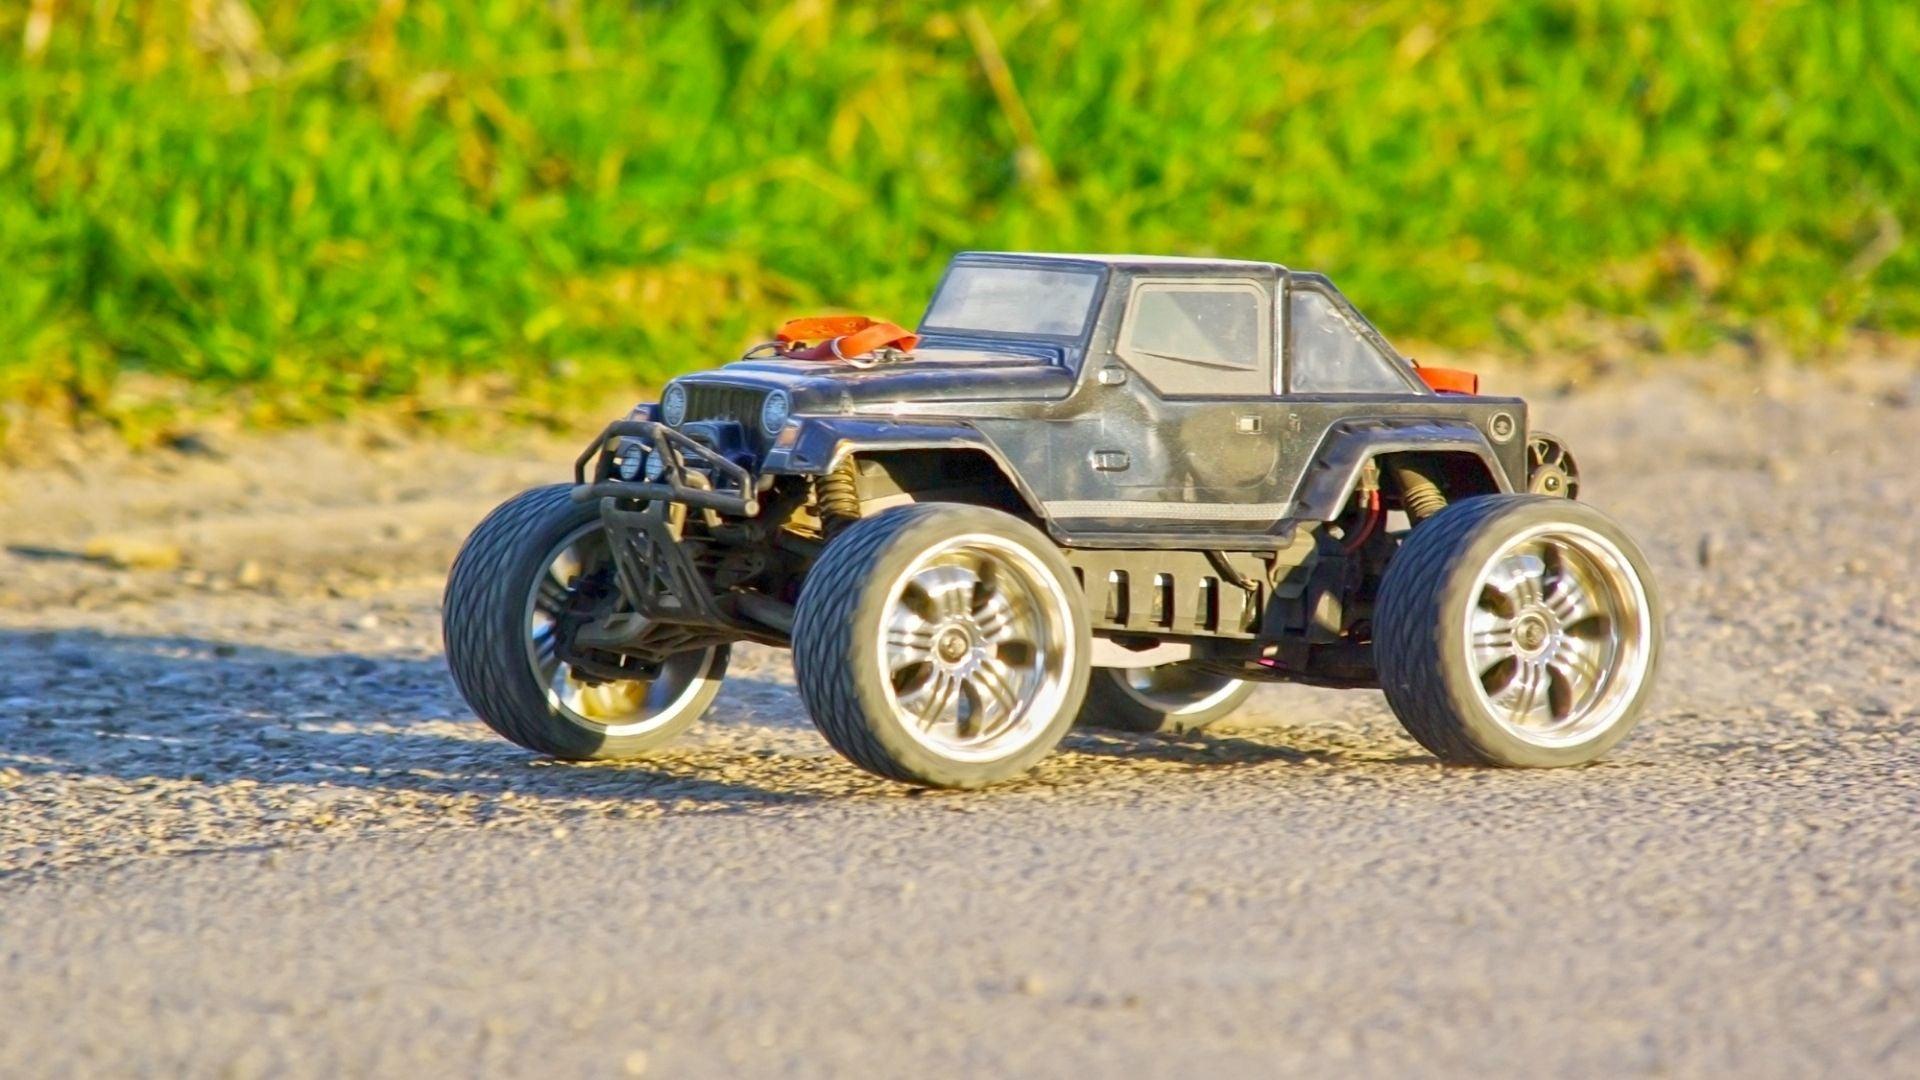 Best Electric Rc Monster Truck: Choosing the Perfect Electric RC Monster Truck: Key Factors to Consider